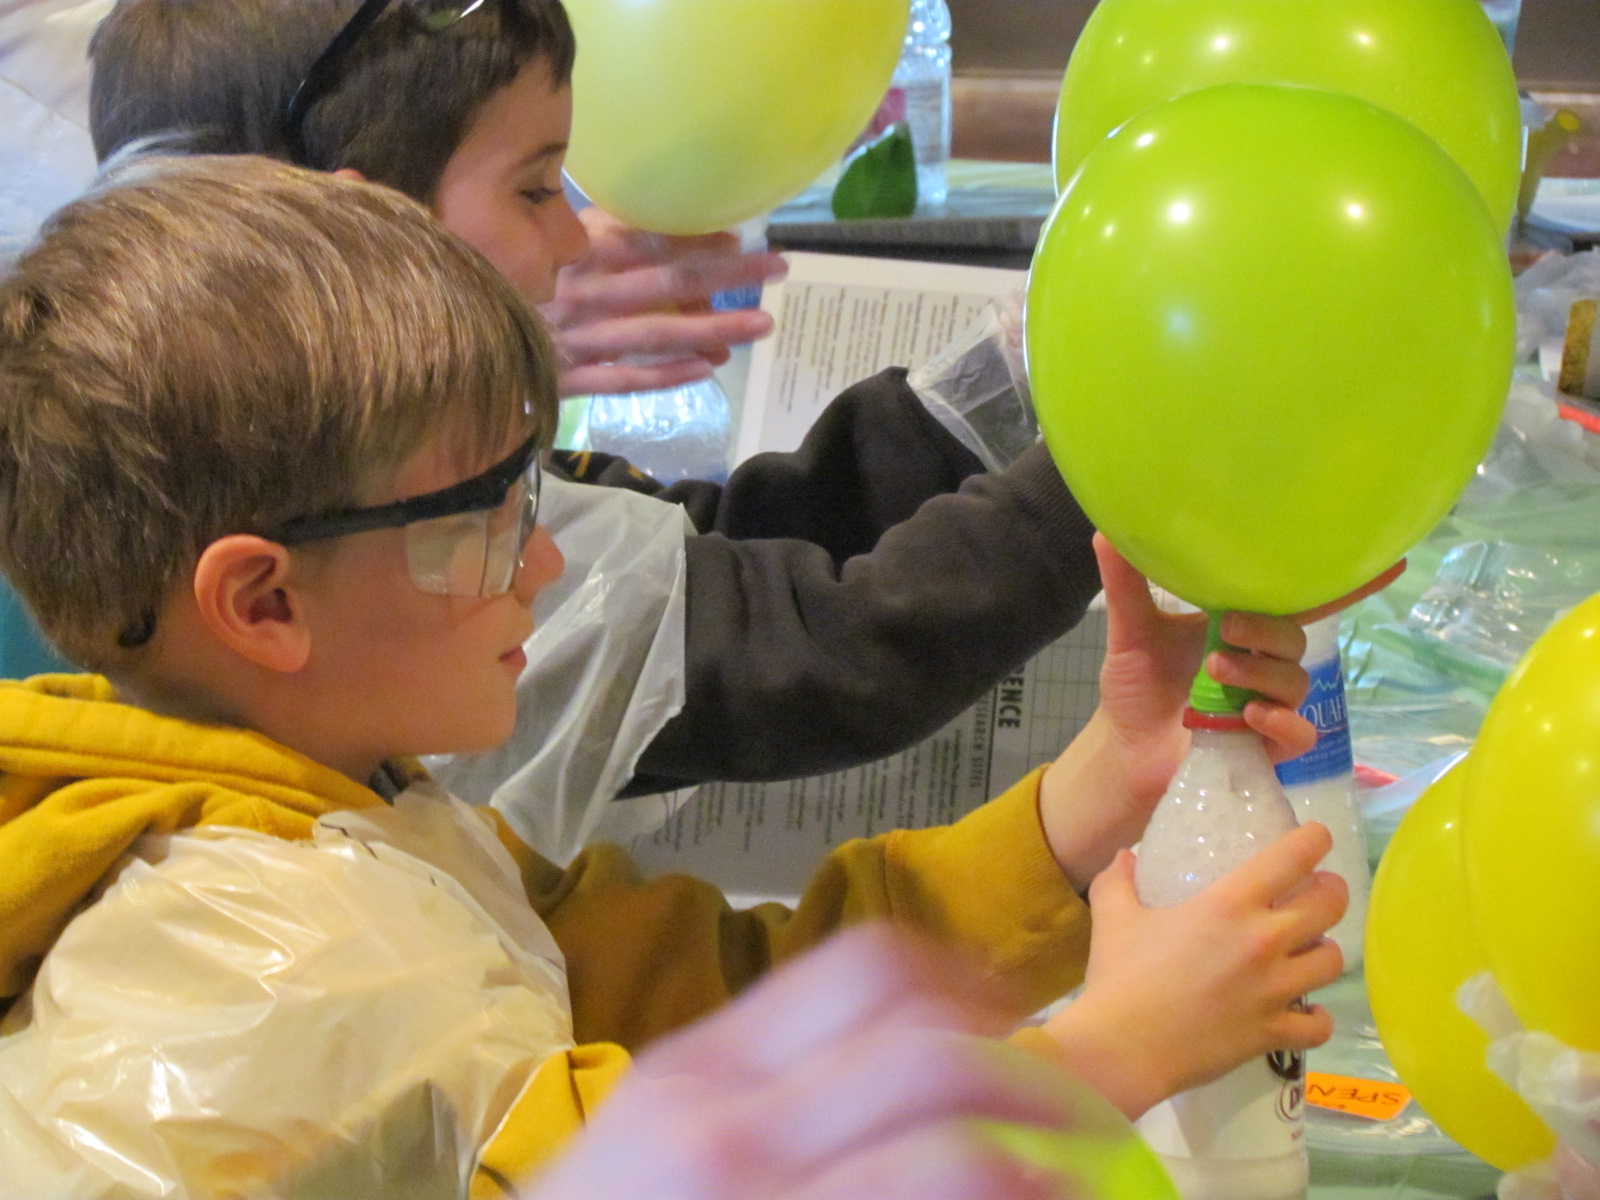 "Blow Up That Balloon" Science Experiment: What a cheap, easy, and fun science experiment for home, school, or a Science Birthday Party!